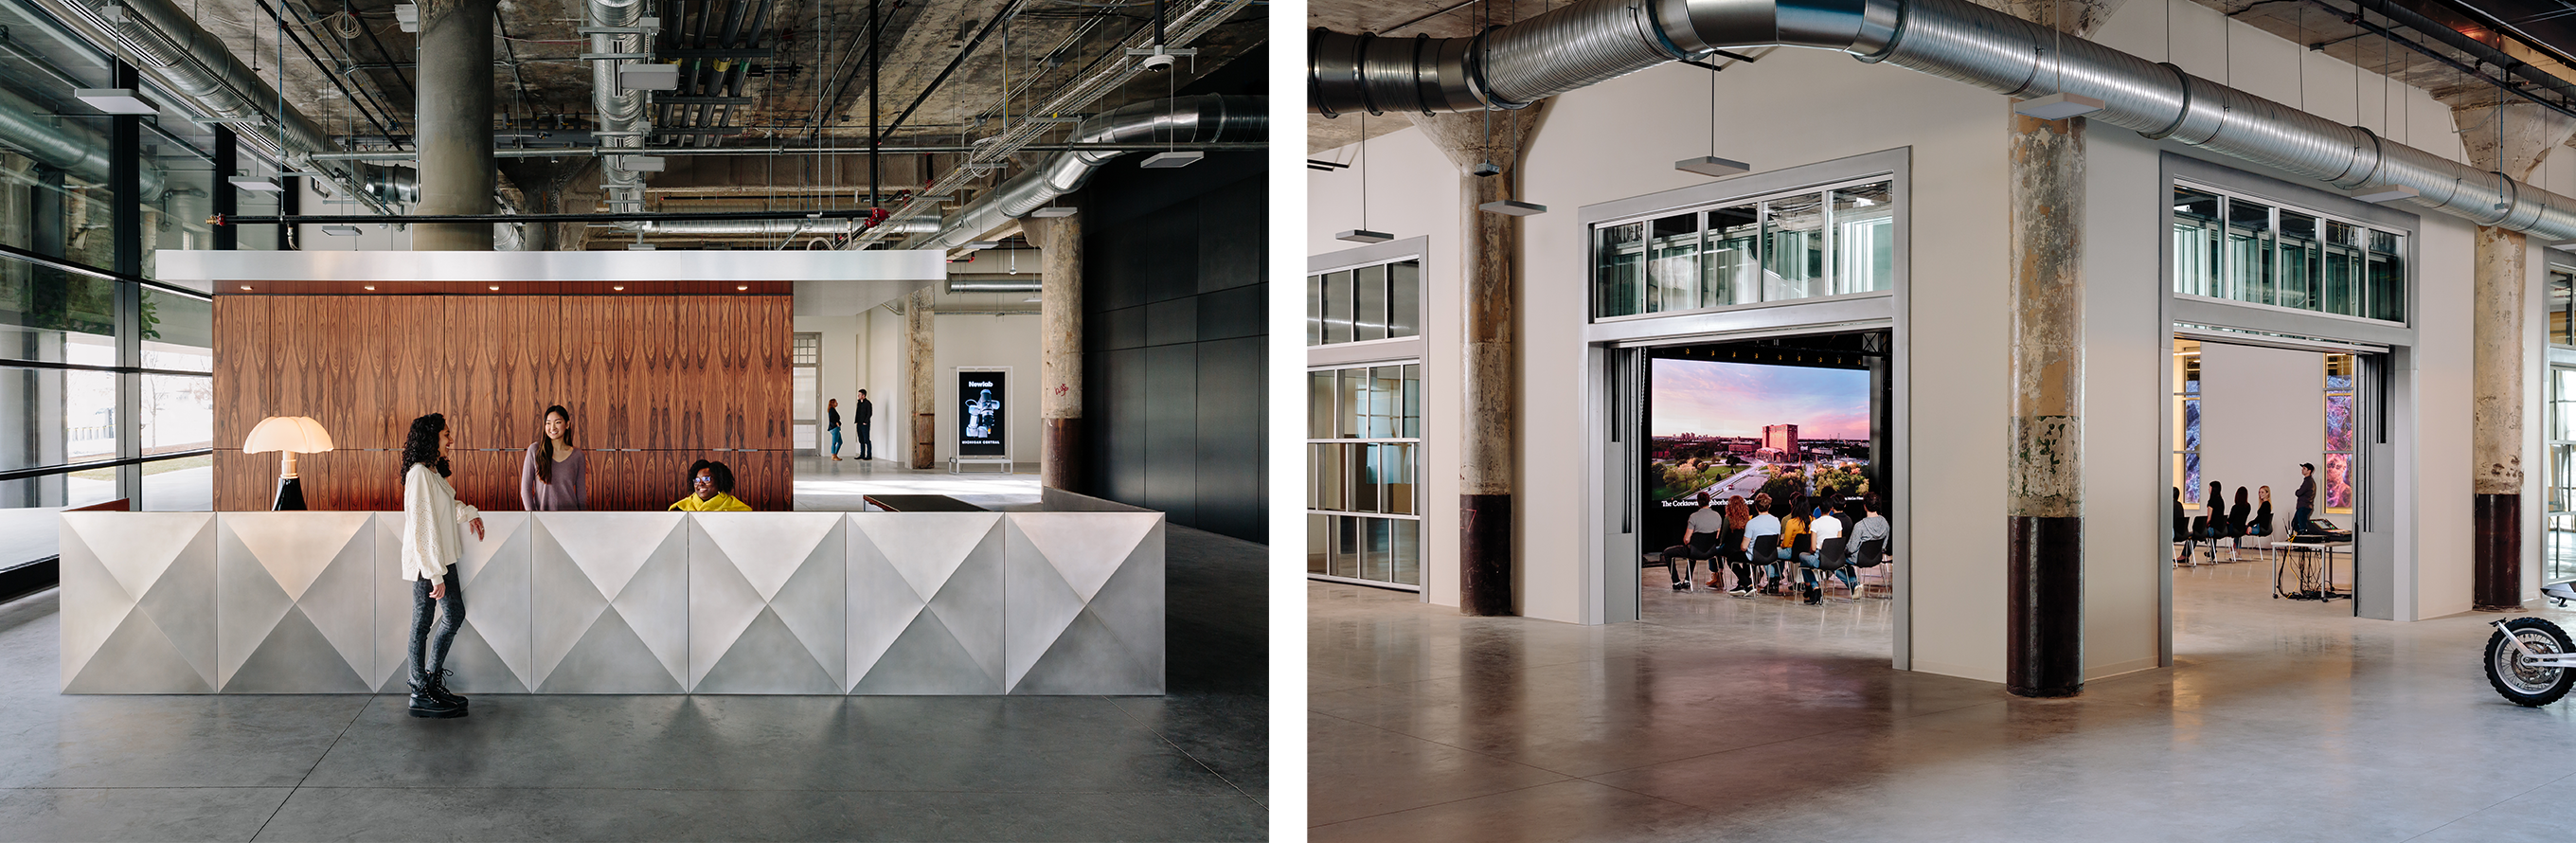 Two image side by side, a reception desk and an events space